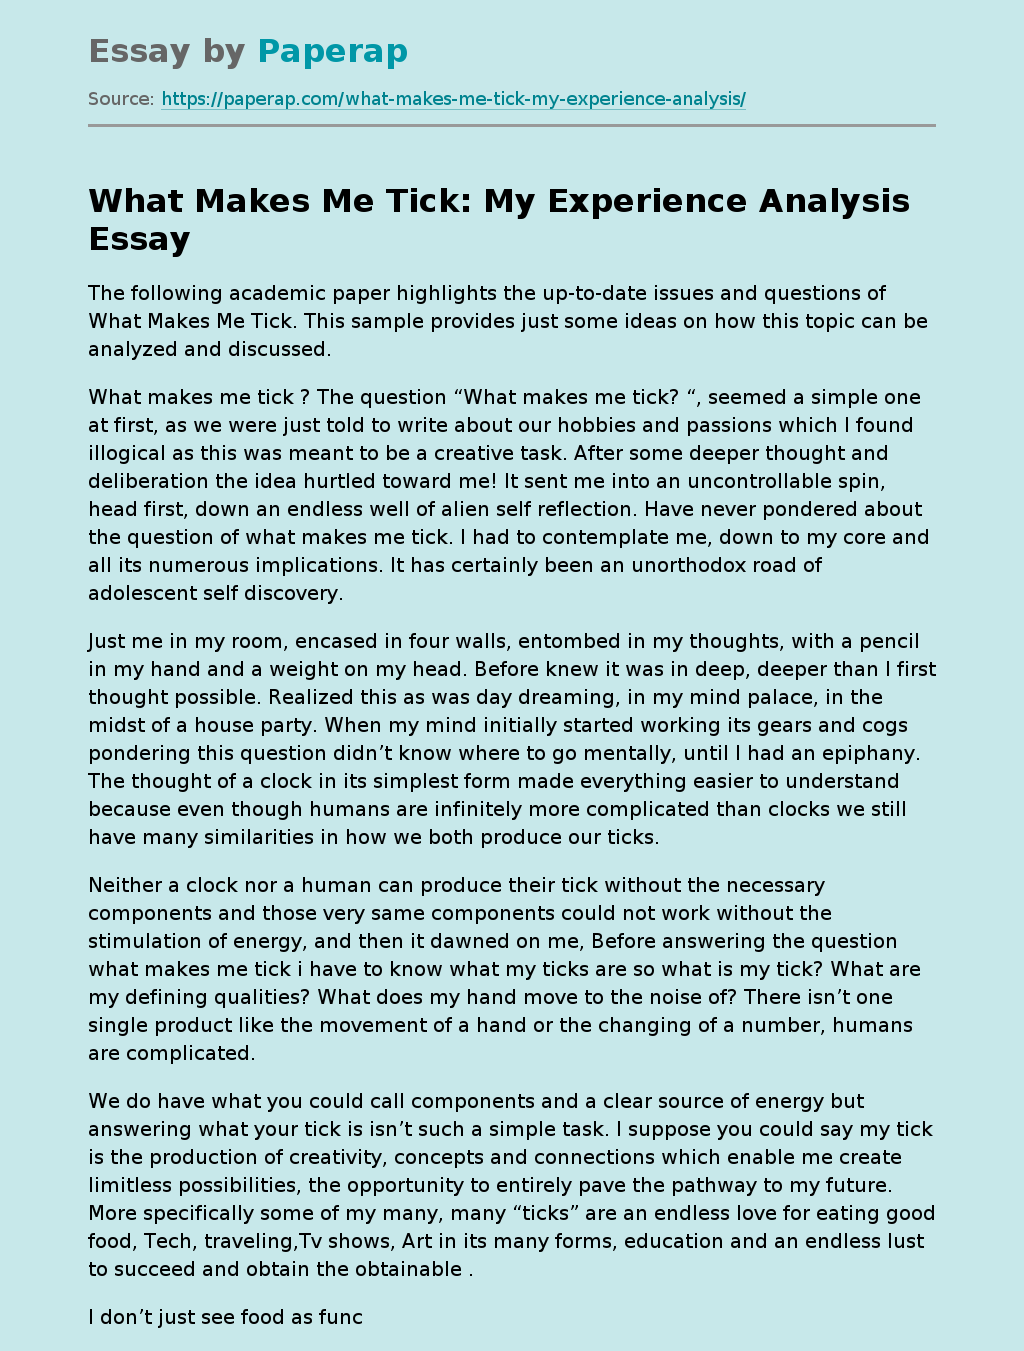 What Makes Me Tick: My Experience Analysis